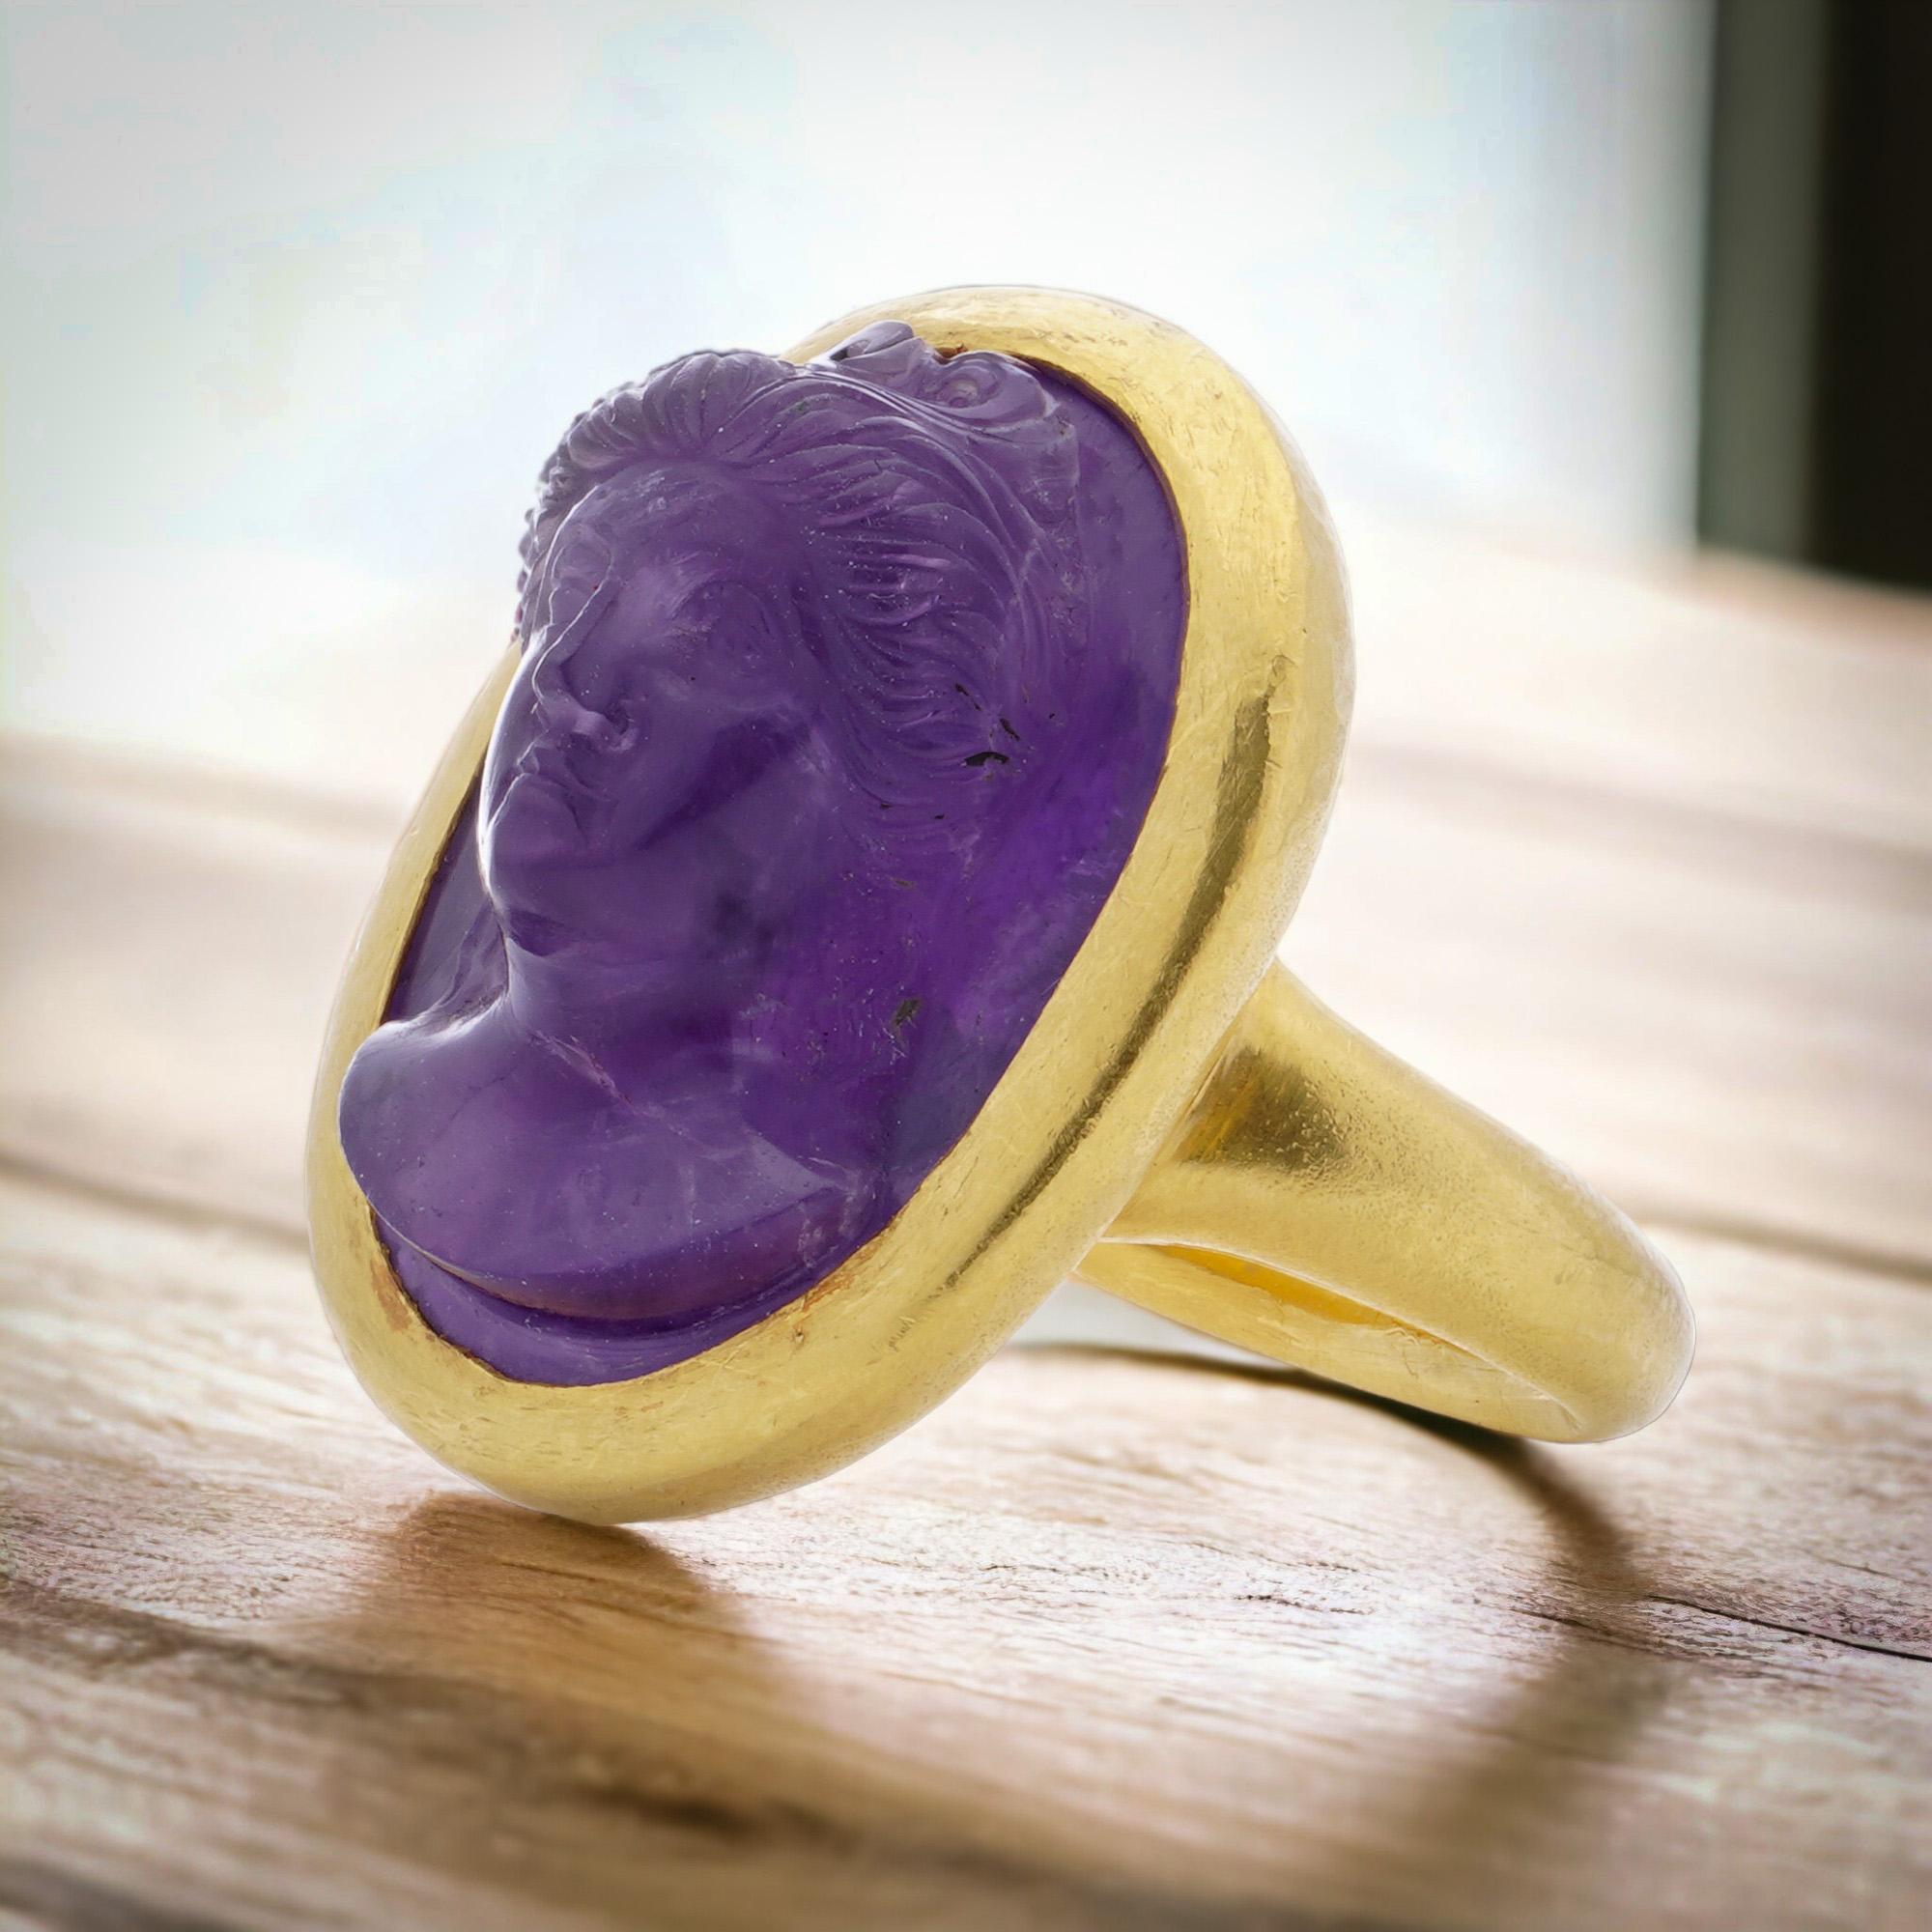 Antique 19th century 24kt. yellow gold carved amethyst intaglio ring with a woman's portrait. 
Made in Europe, Circa 1870's 
X-Ray has been tested positive for 24kt. yellow gold. 

The dimensions - 
Ring Size: Length x Width x depth: 3.7 x 2.2 x 1.6